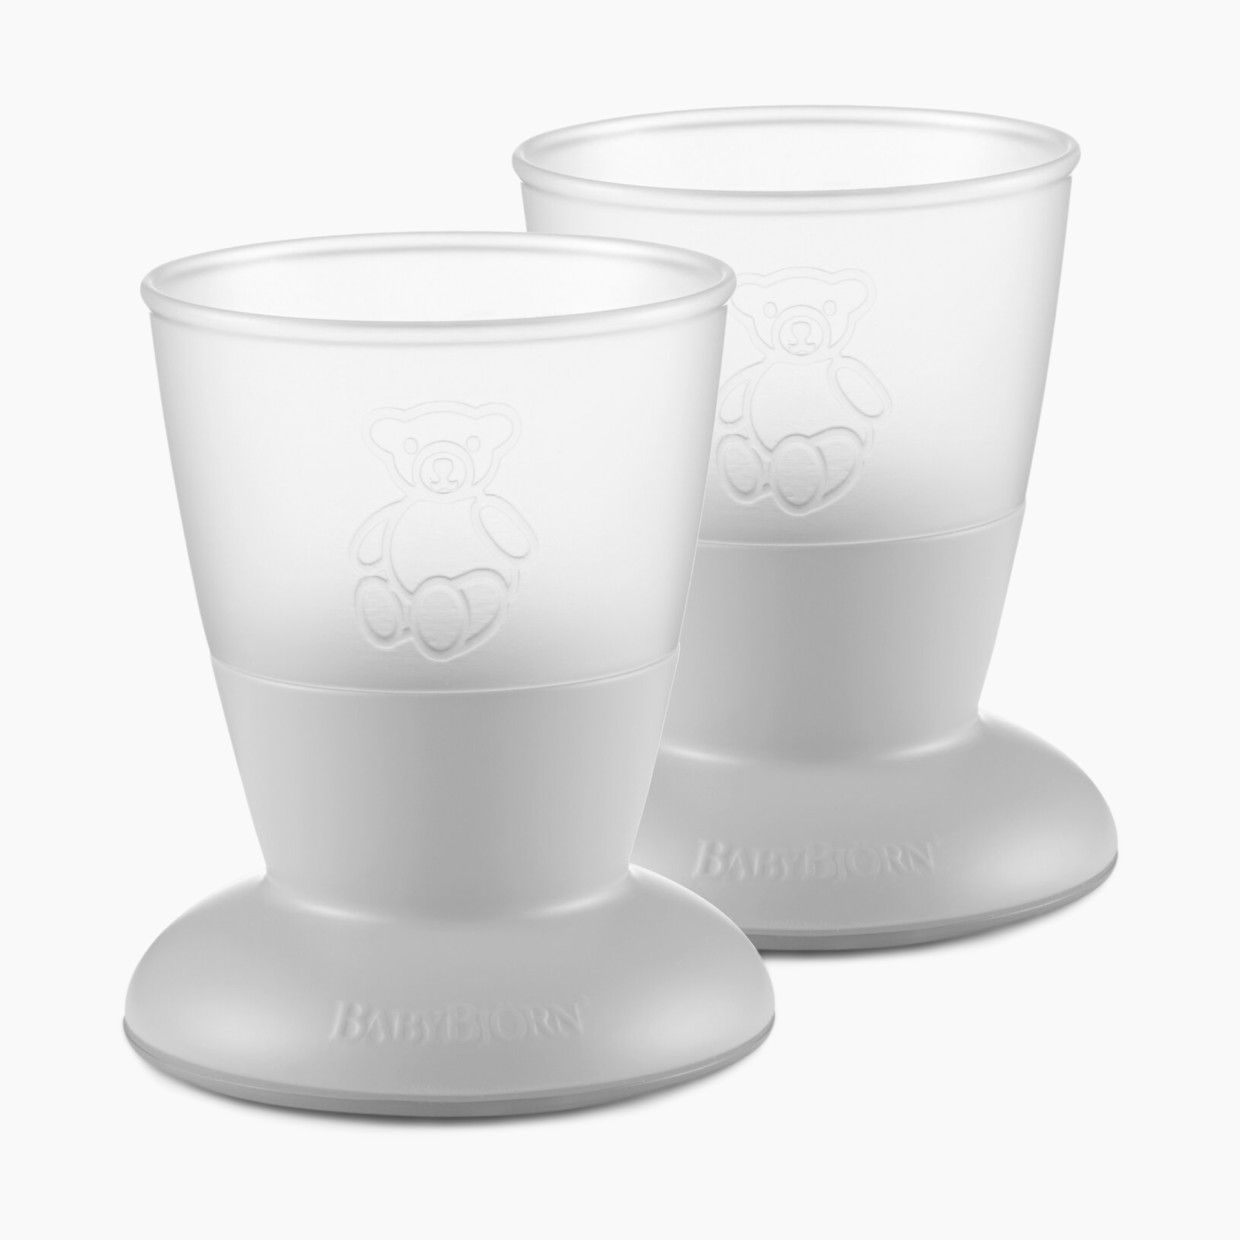 Babybjörn Baby Cup (2-pack) - Gray.